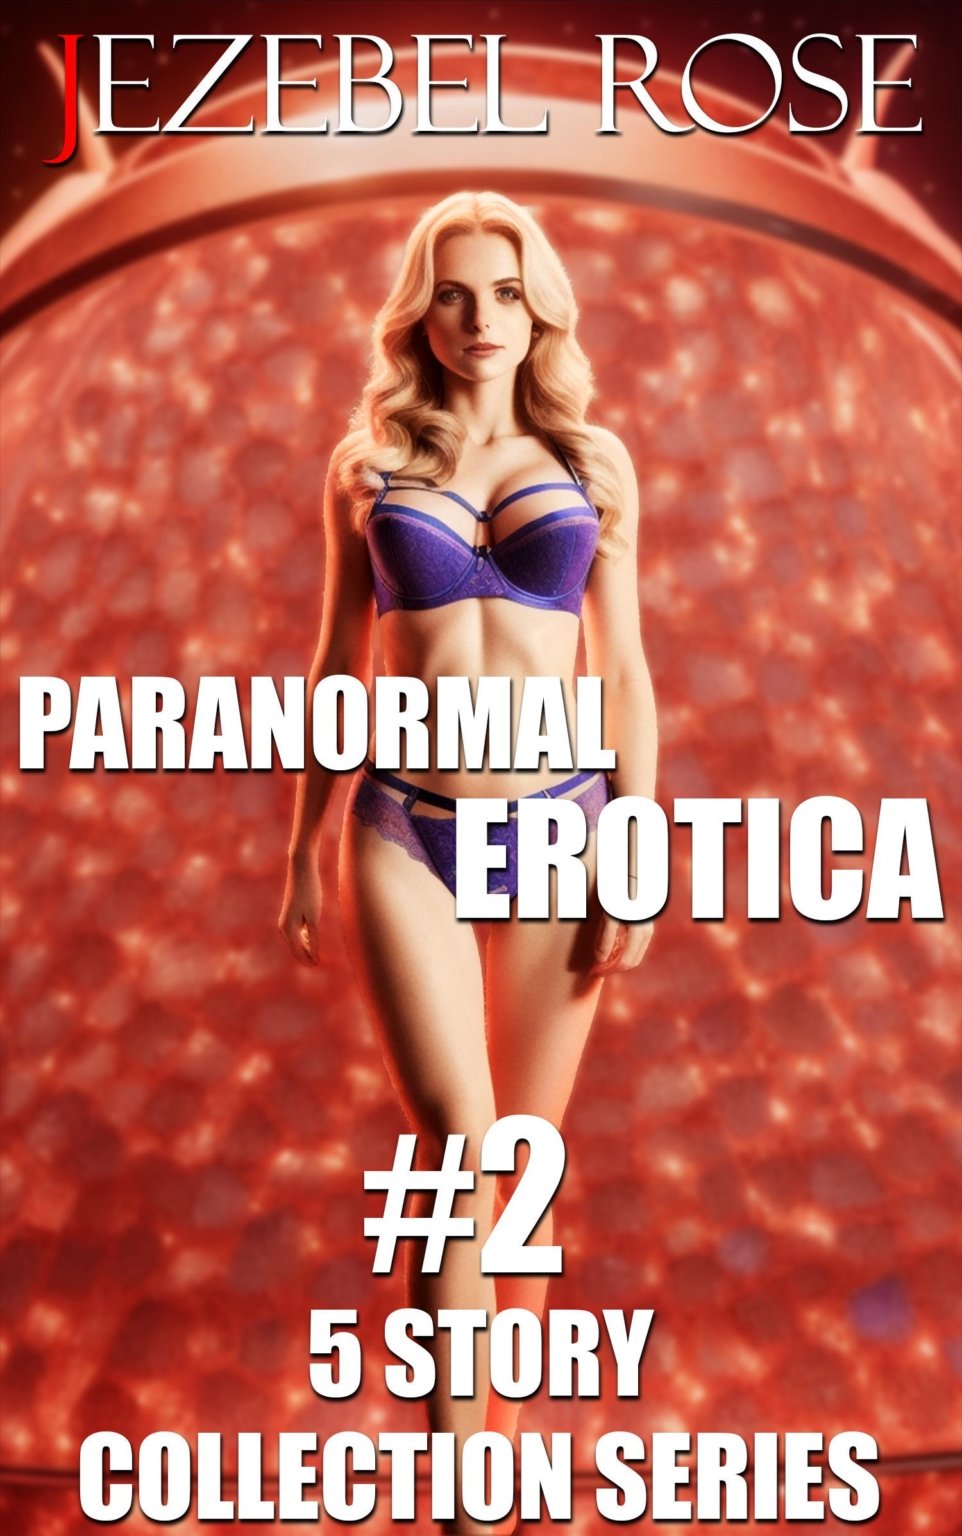 Paranormal Erotica 5 Story Bundle Collection Series #2 cover design by Jezebel Rose